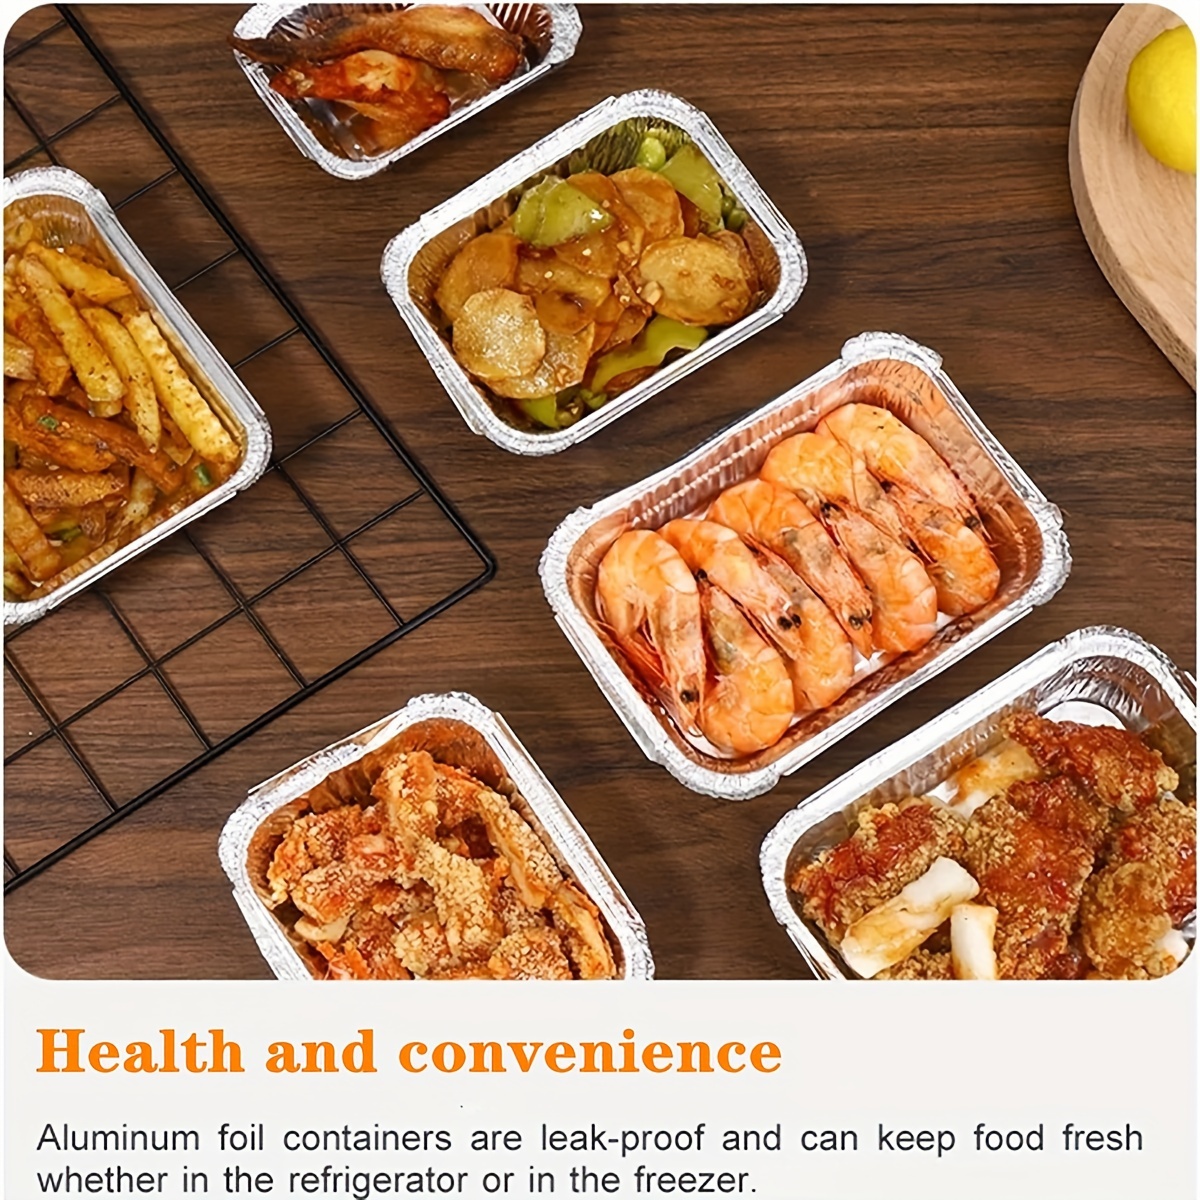 Foil & Aluminum Food Containers: Great for Take-Out & To-Go